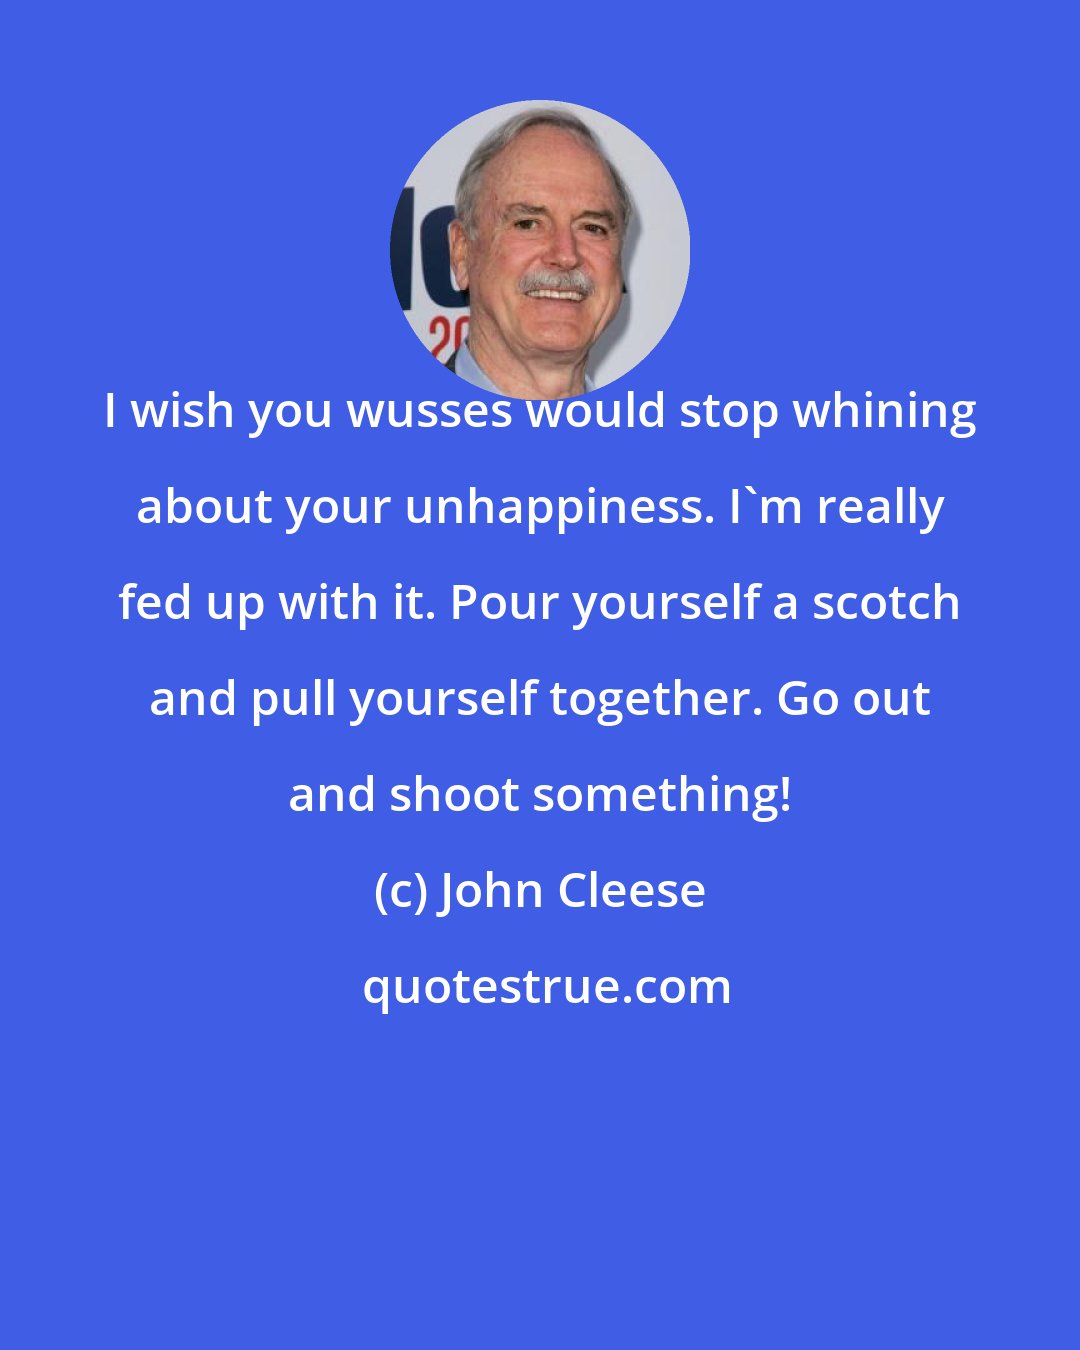 John Cleese: I wish you wusses would stop whining about your unhappiness. I'm really fed up with it. Pour yourself a scotch and pull yourself together. Go out and shoot something!